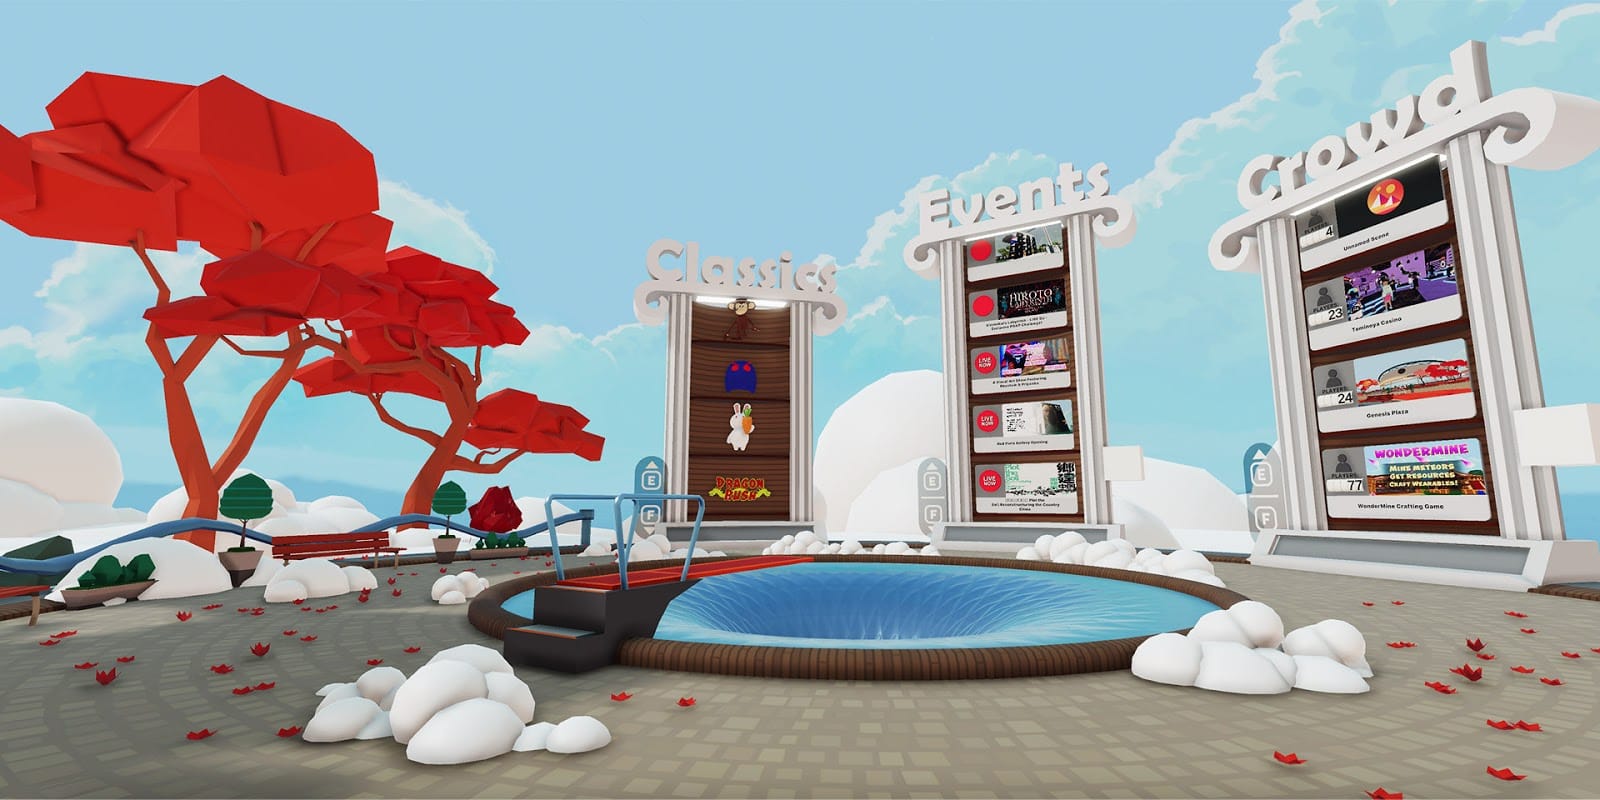 New Metaverse Hotel ‘M-Social’ Launched By Mellenium Hotels In ...